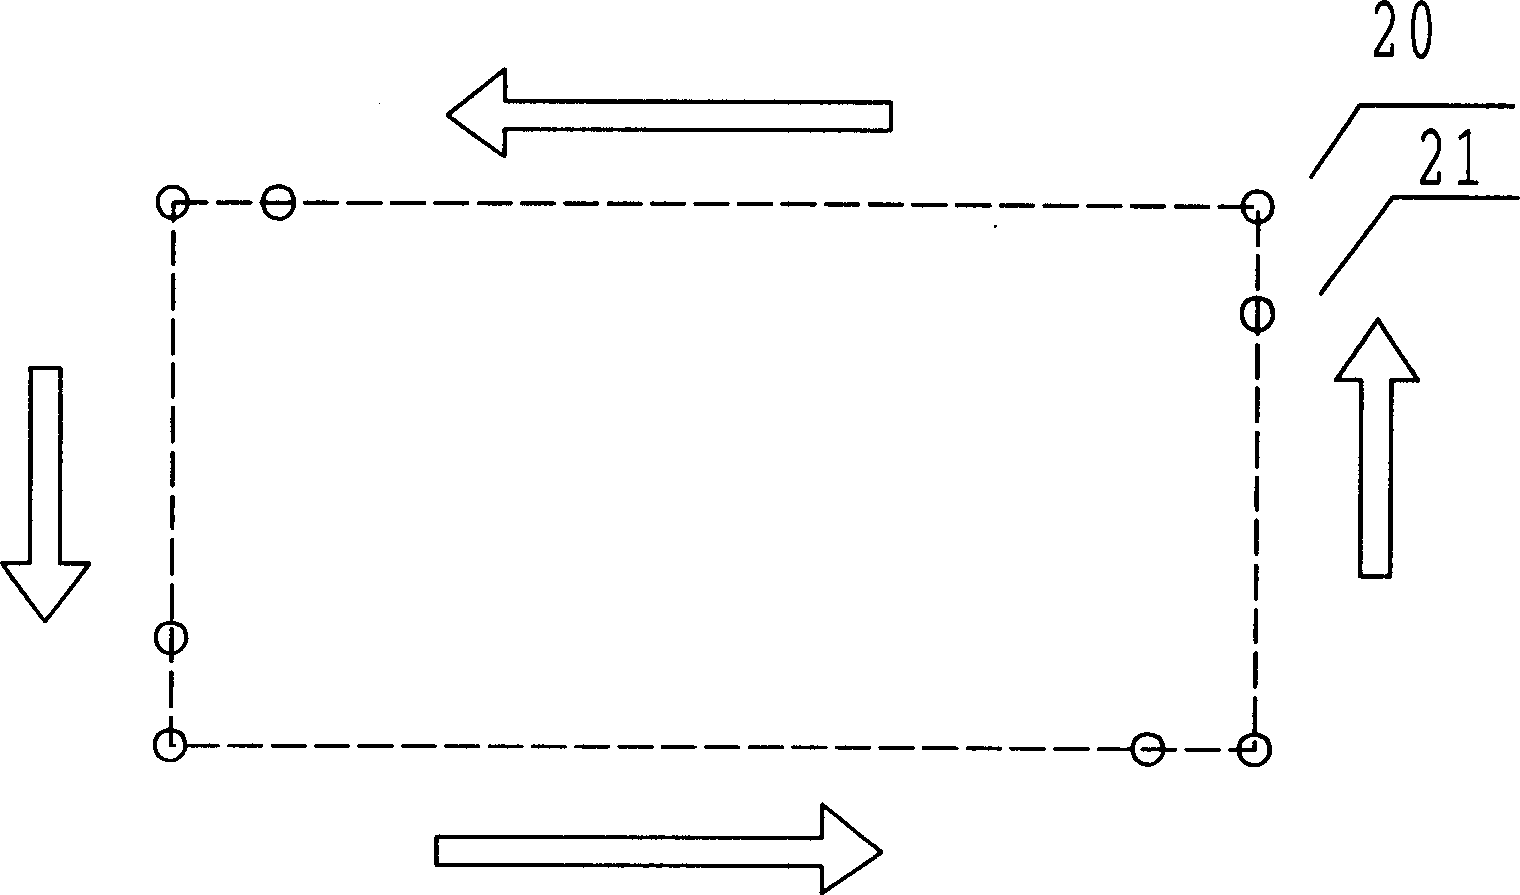 Longitudinal double-row automatic transfer method for fixed length steel in bar production